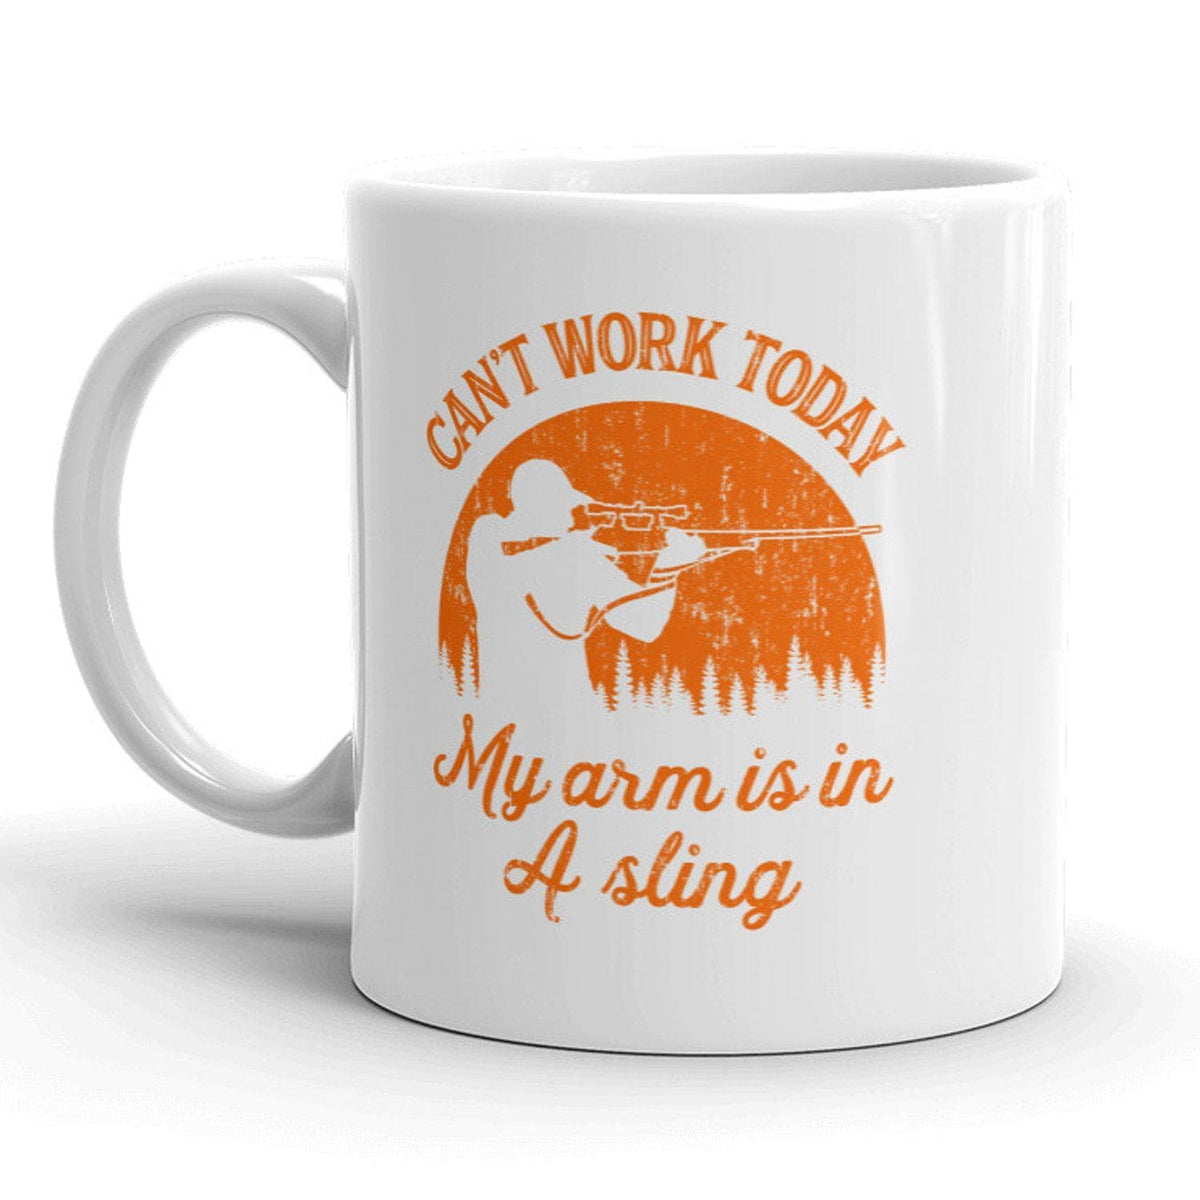 Cant Work Today My Arm Is In A Sling Mug - Crazy Dog T-Shirts